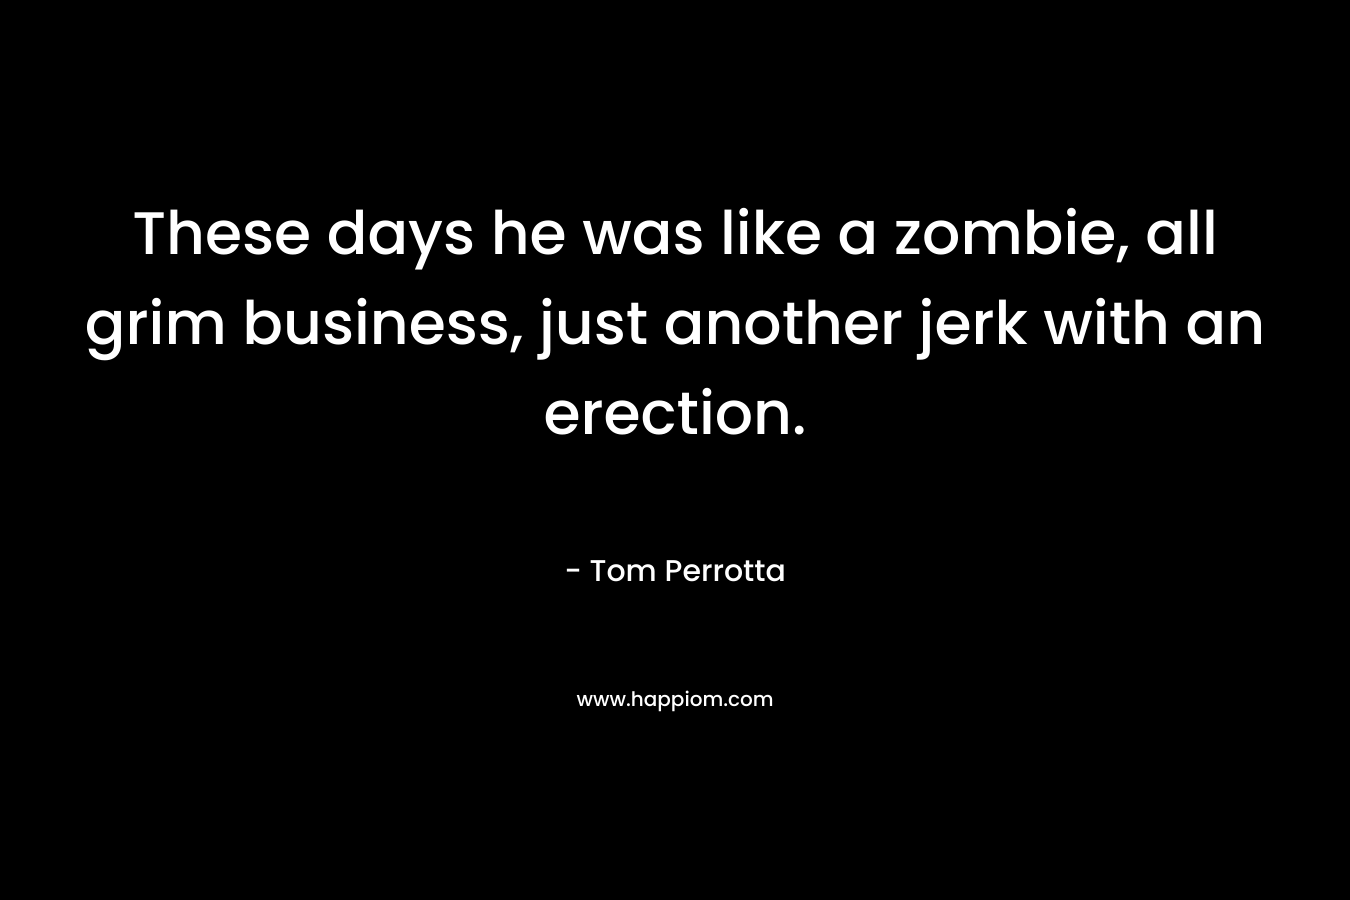 These days he was like a zombie, all grim business, just another jerk with an erection.